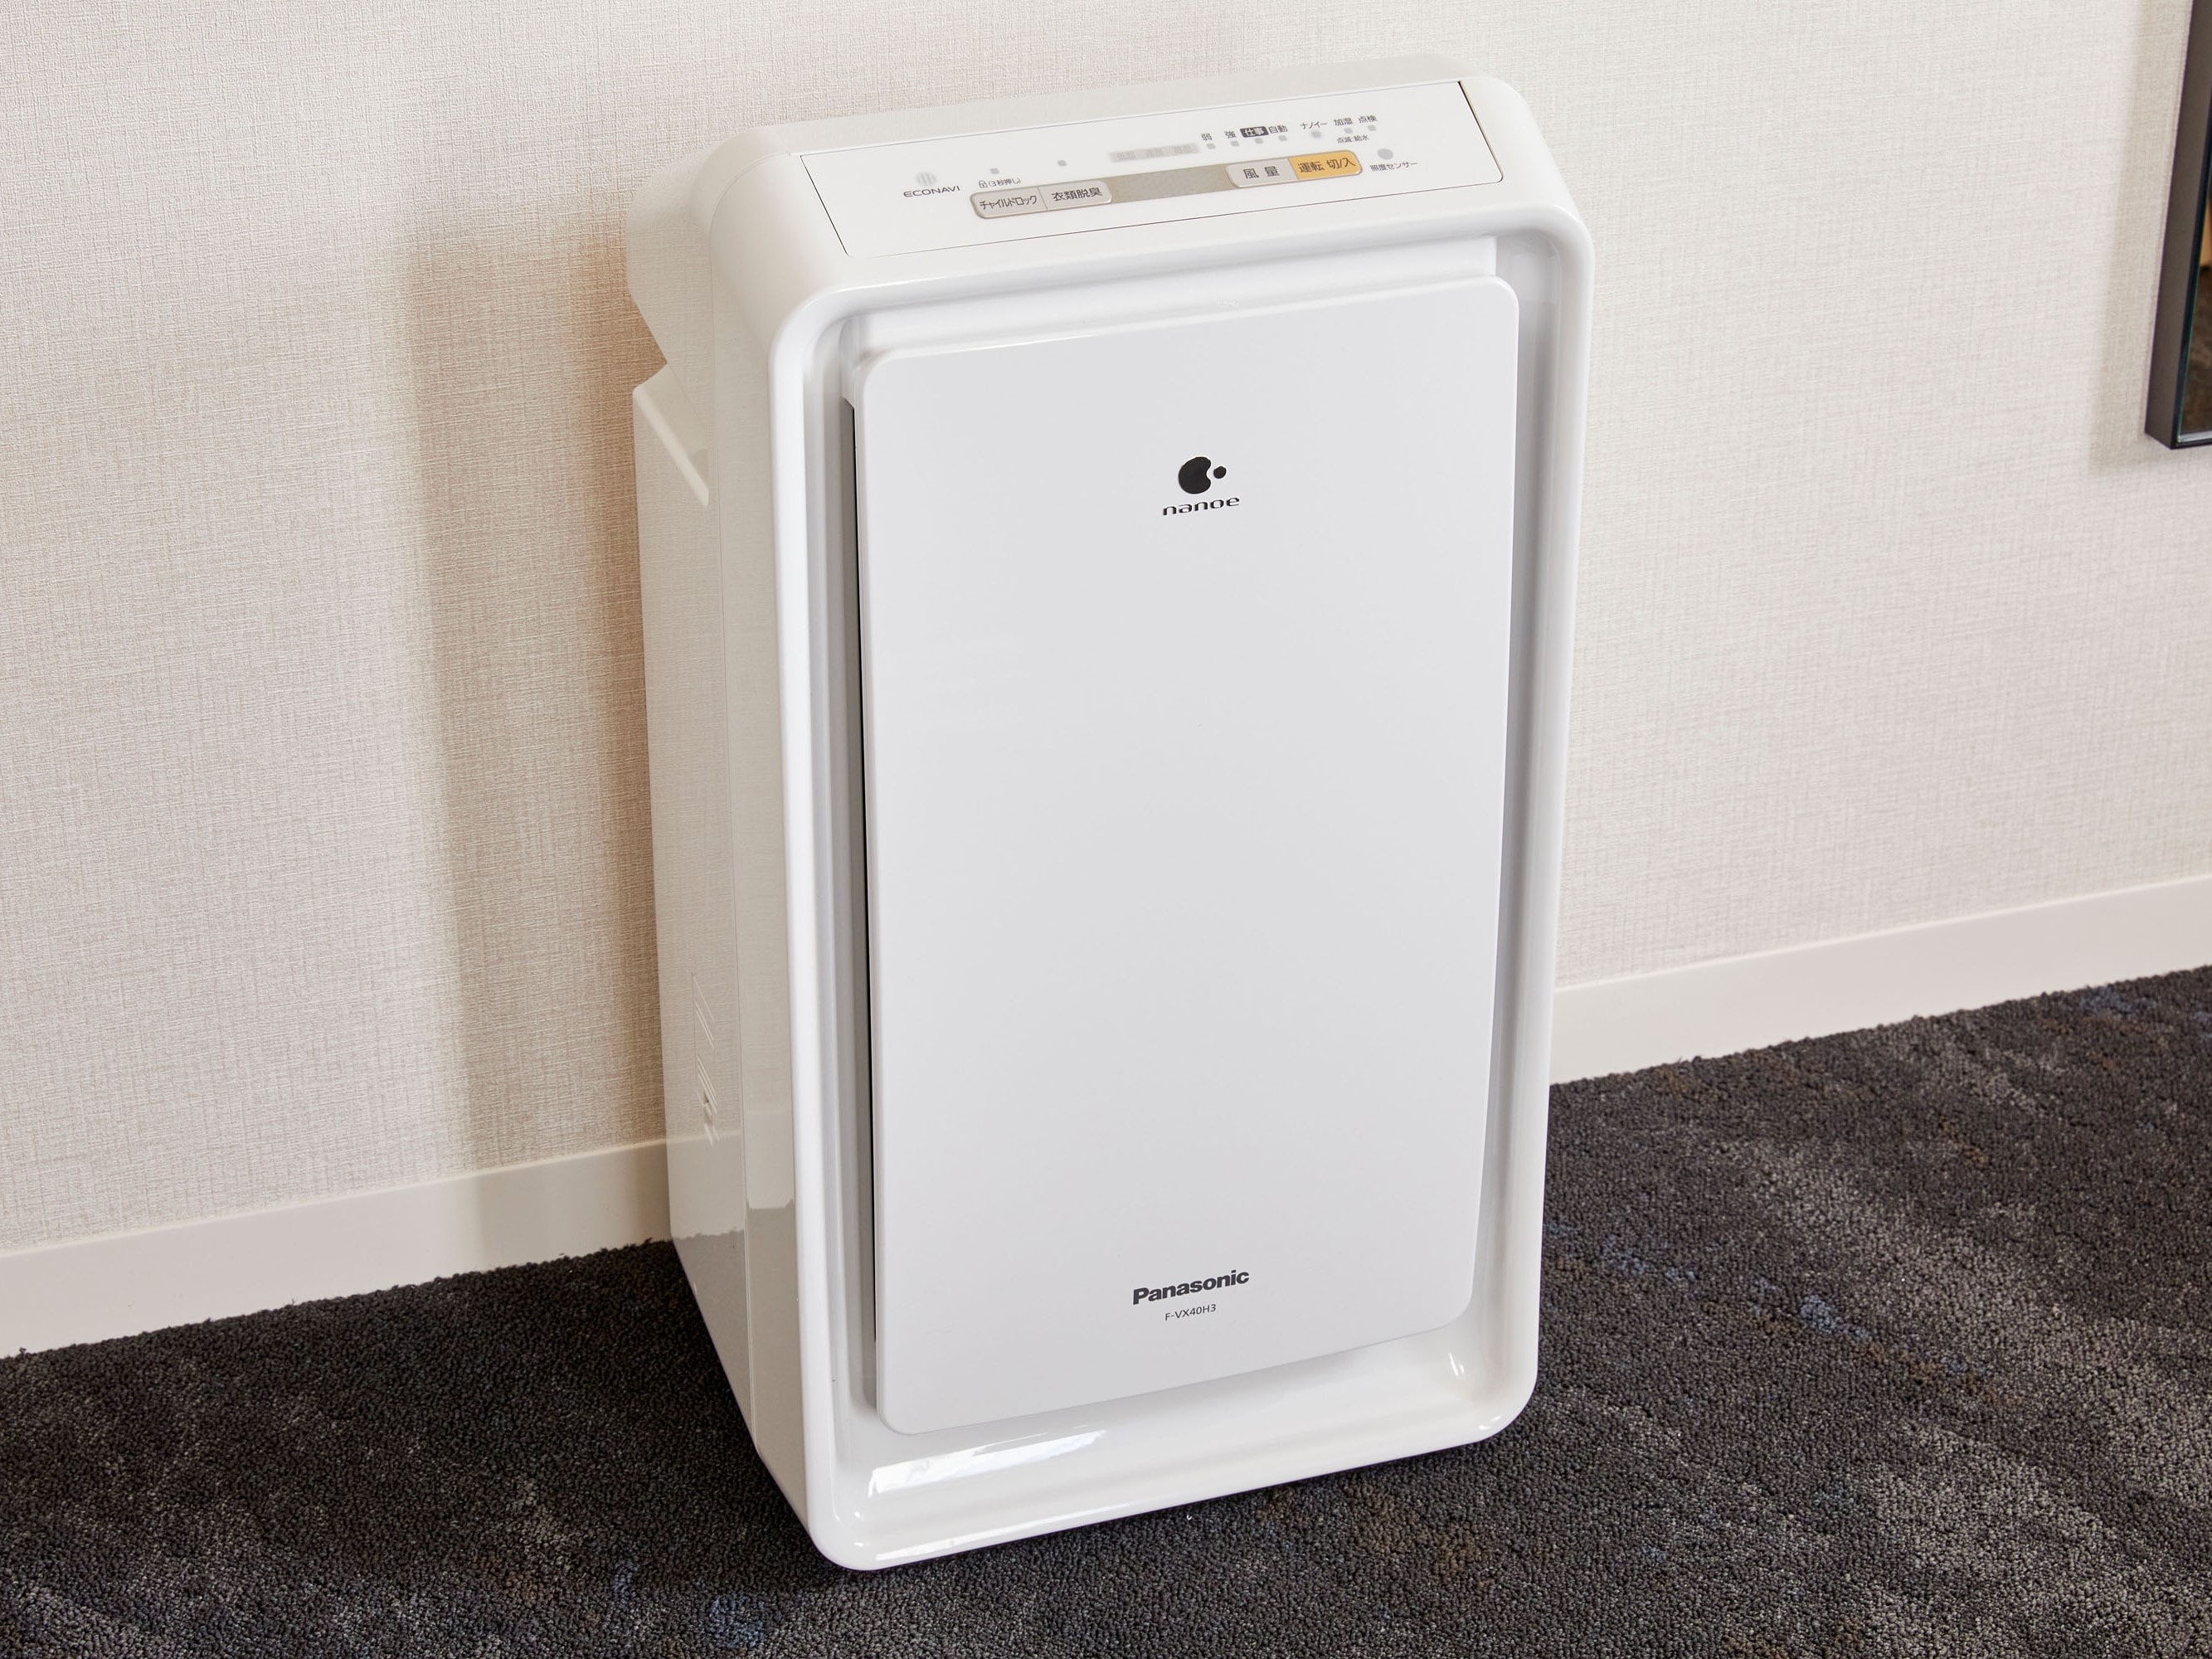 All rooms are equipped with a humidified air purifier